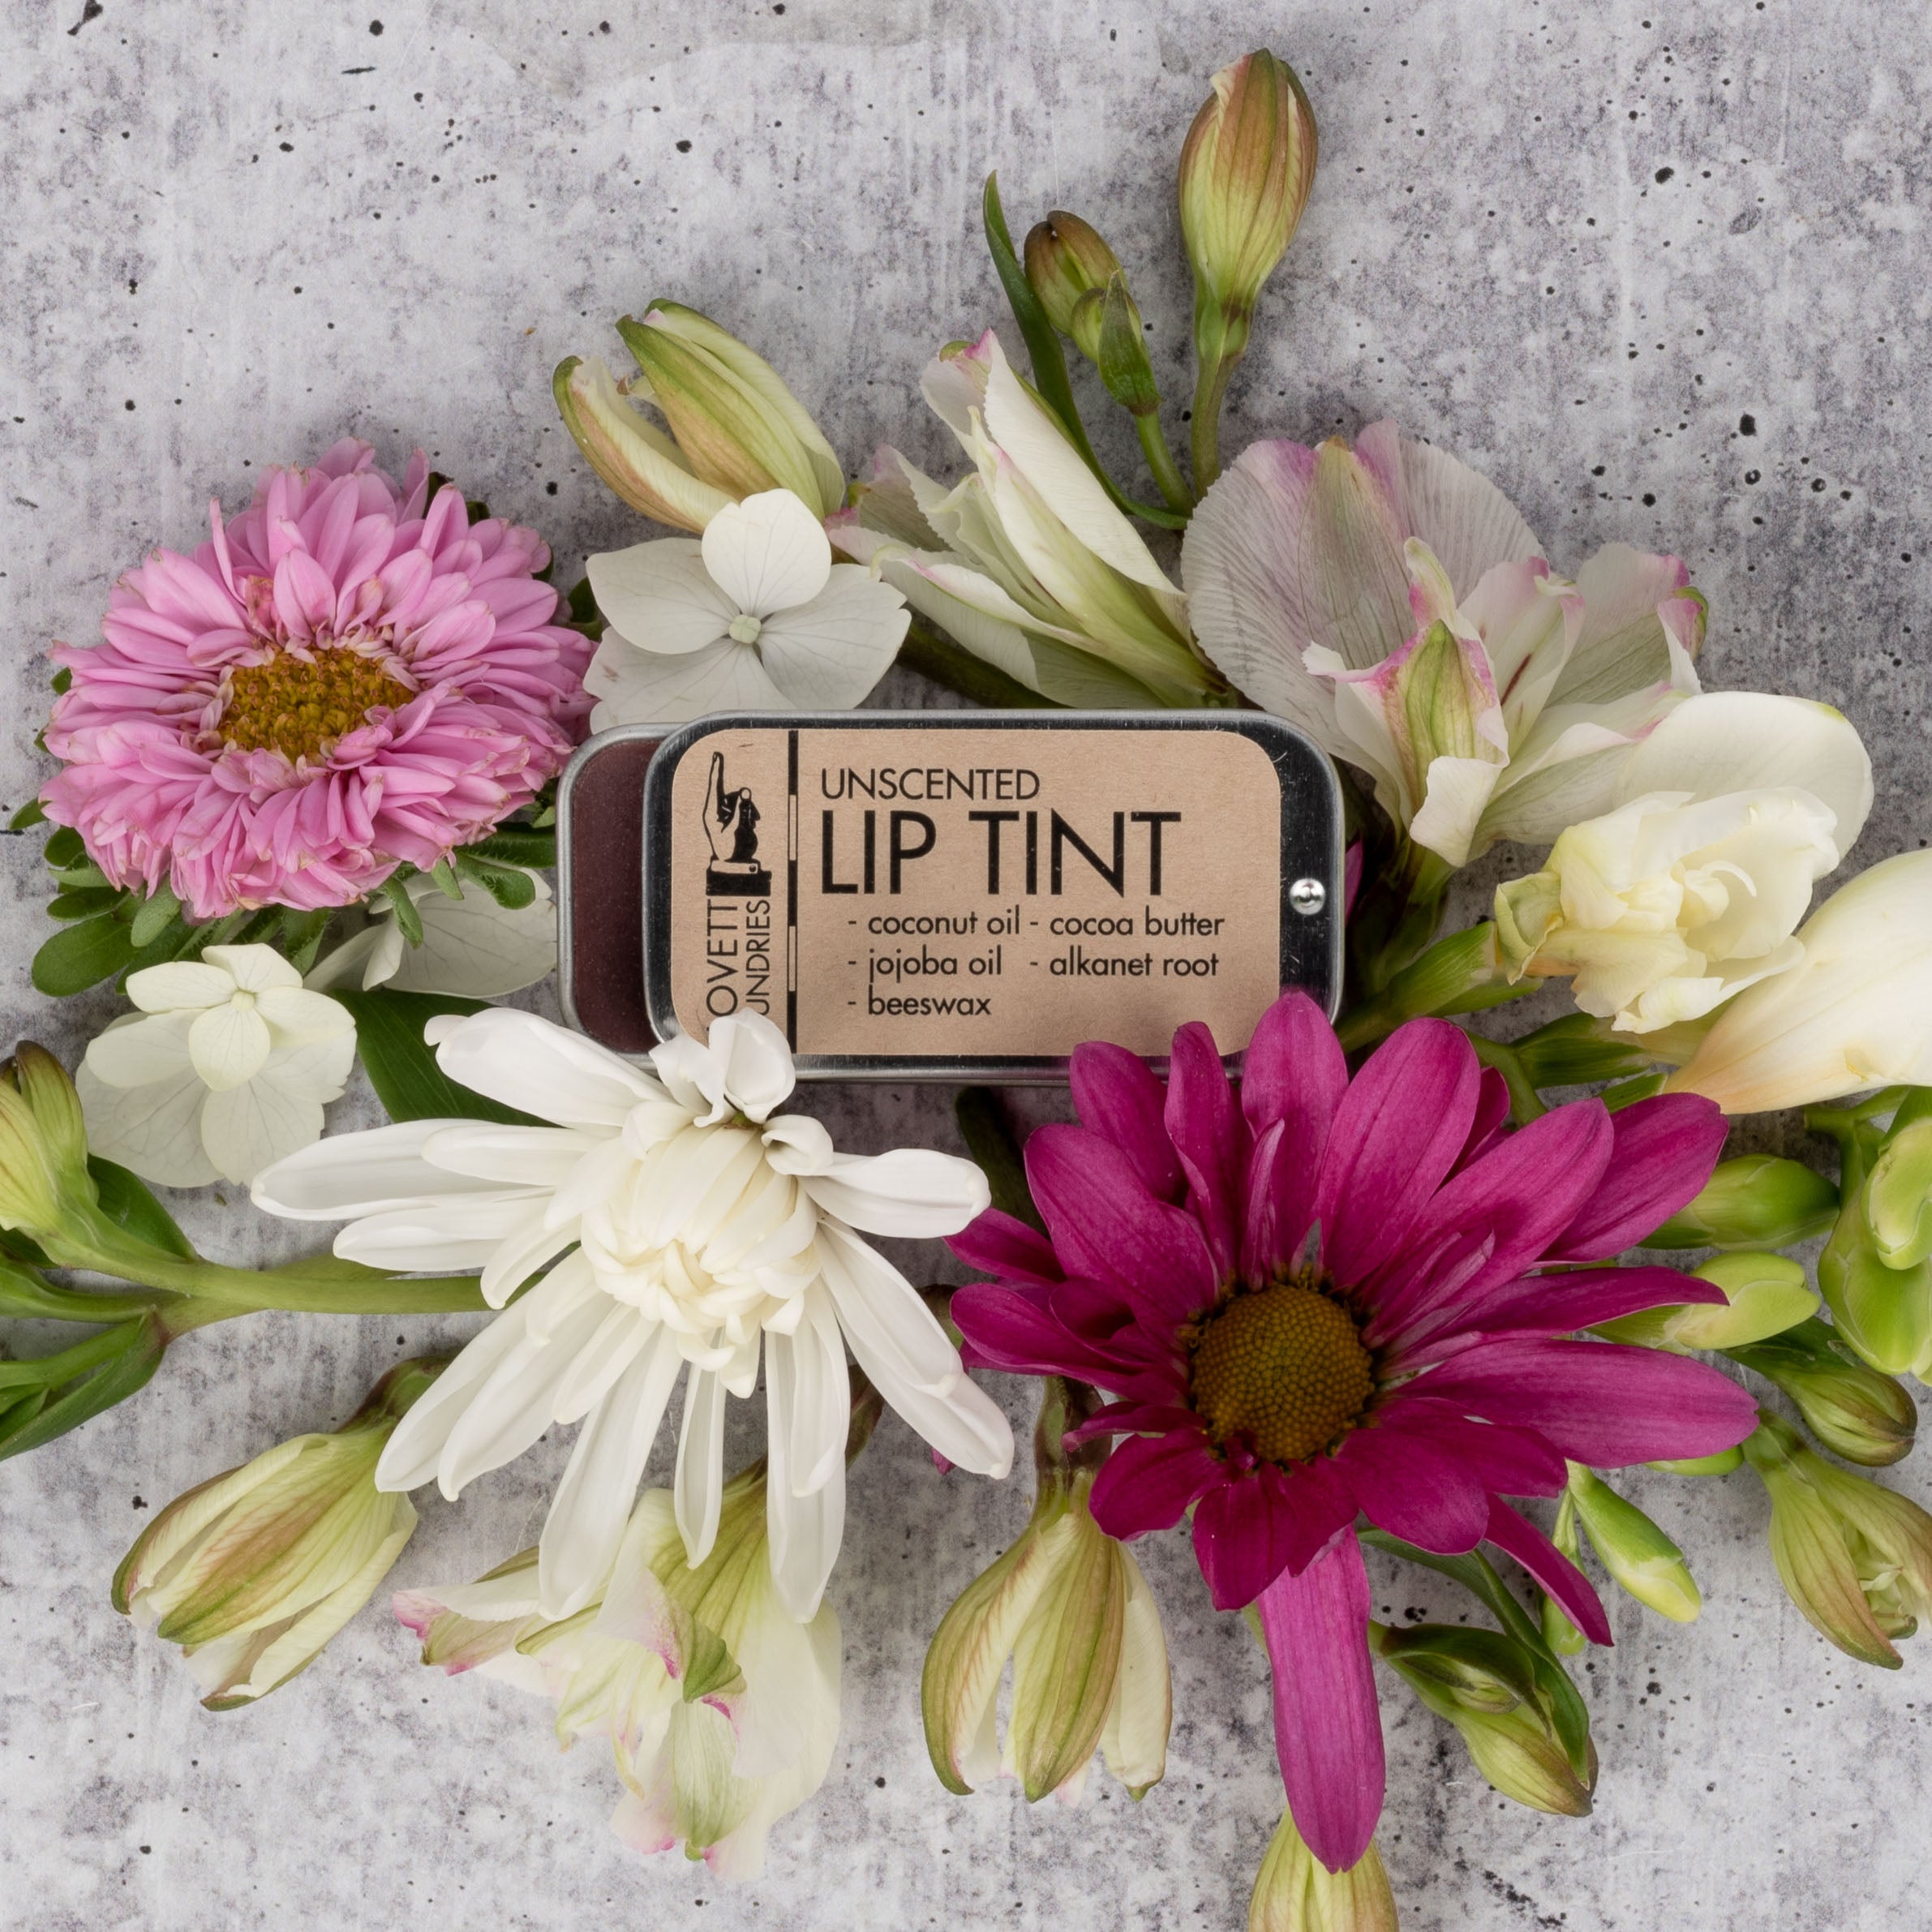 Unscented All-Natural Lip Tint surrounded by flowers.